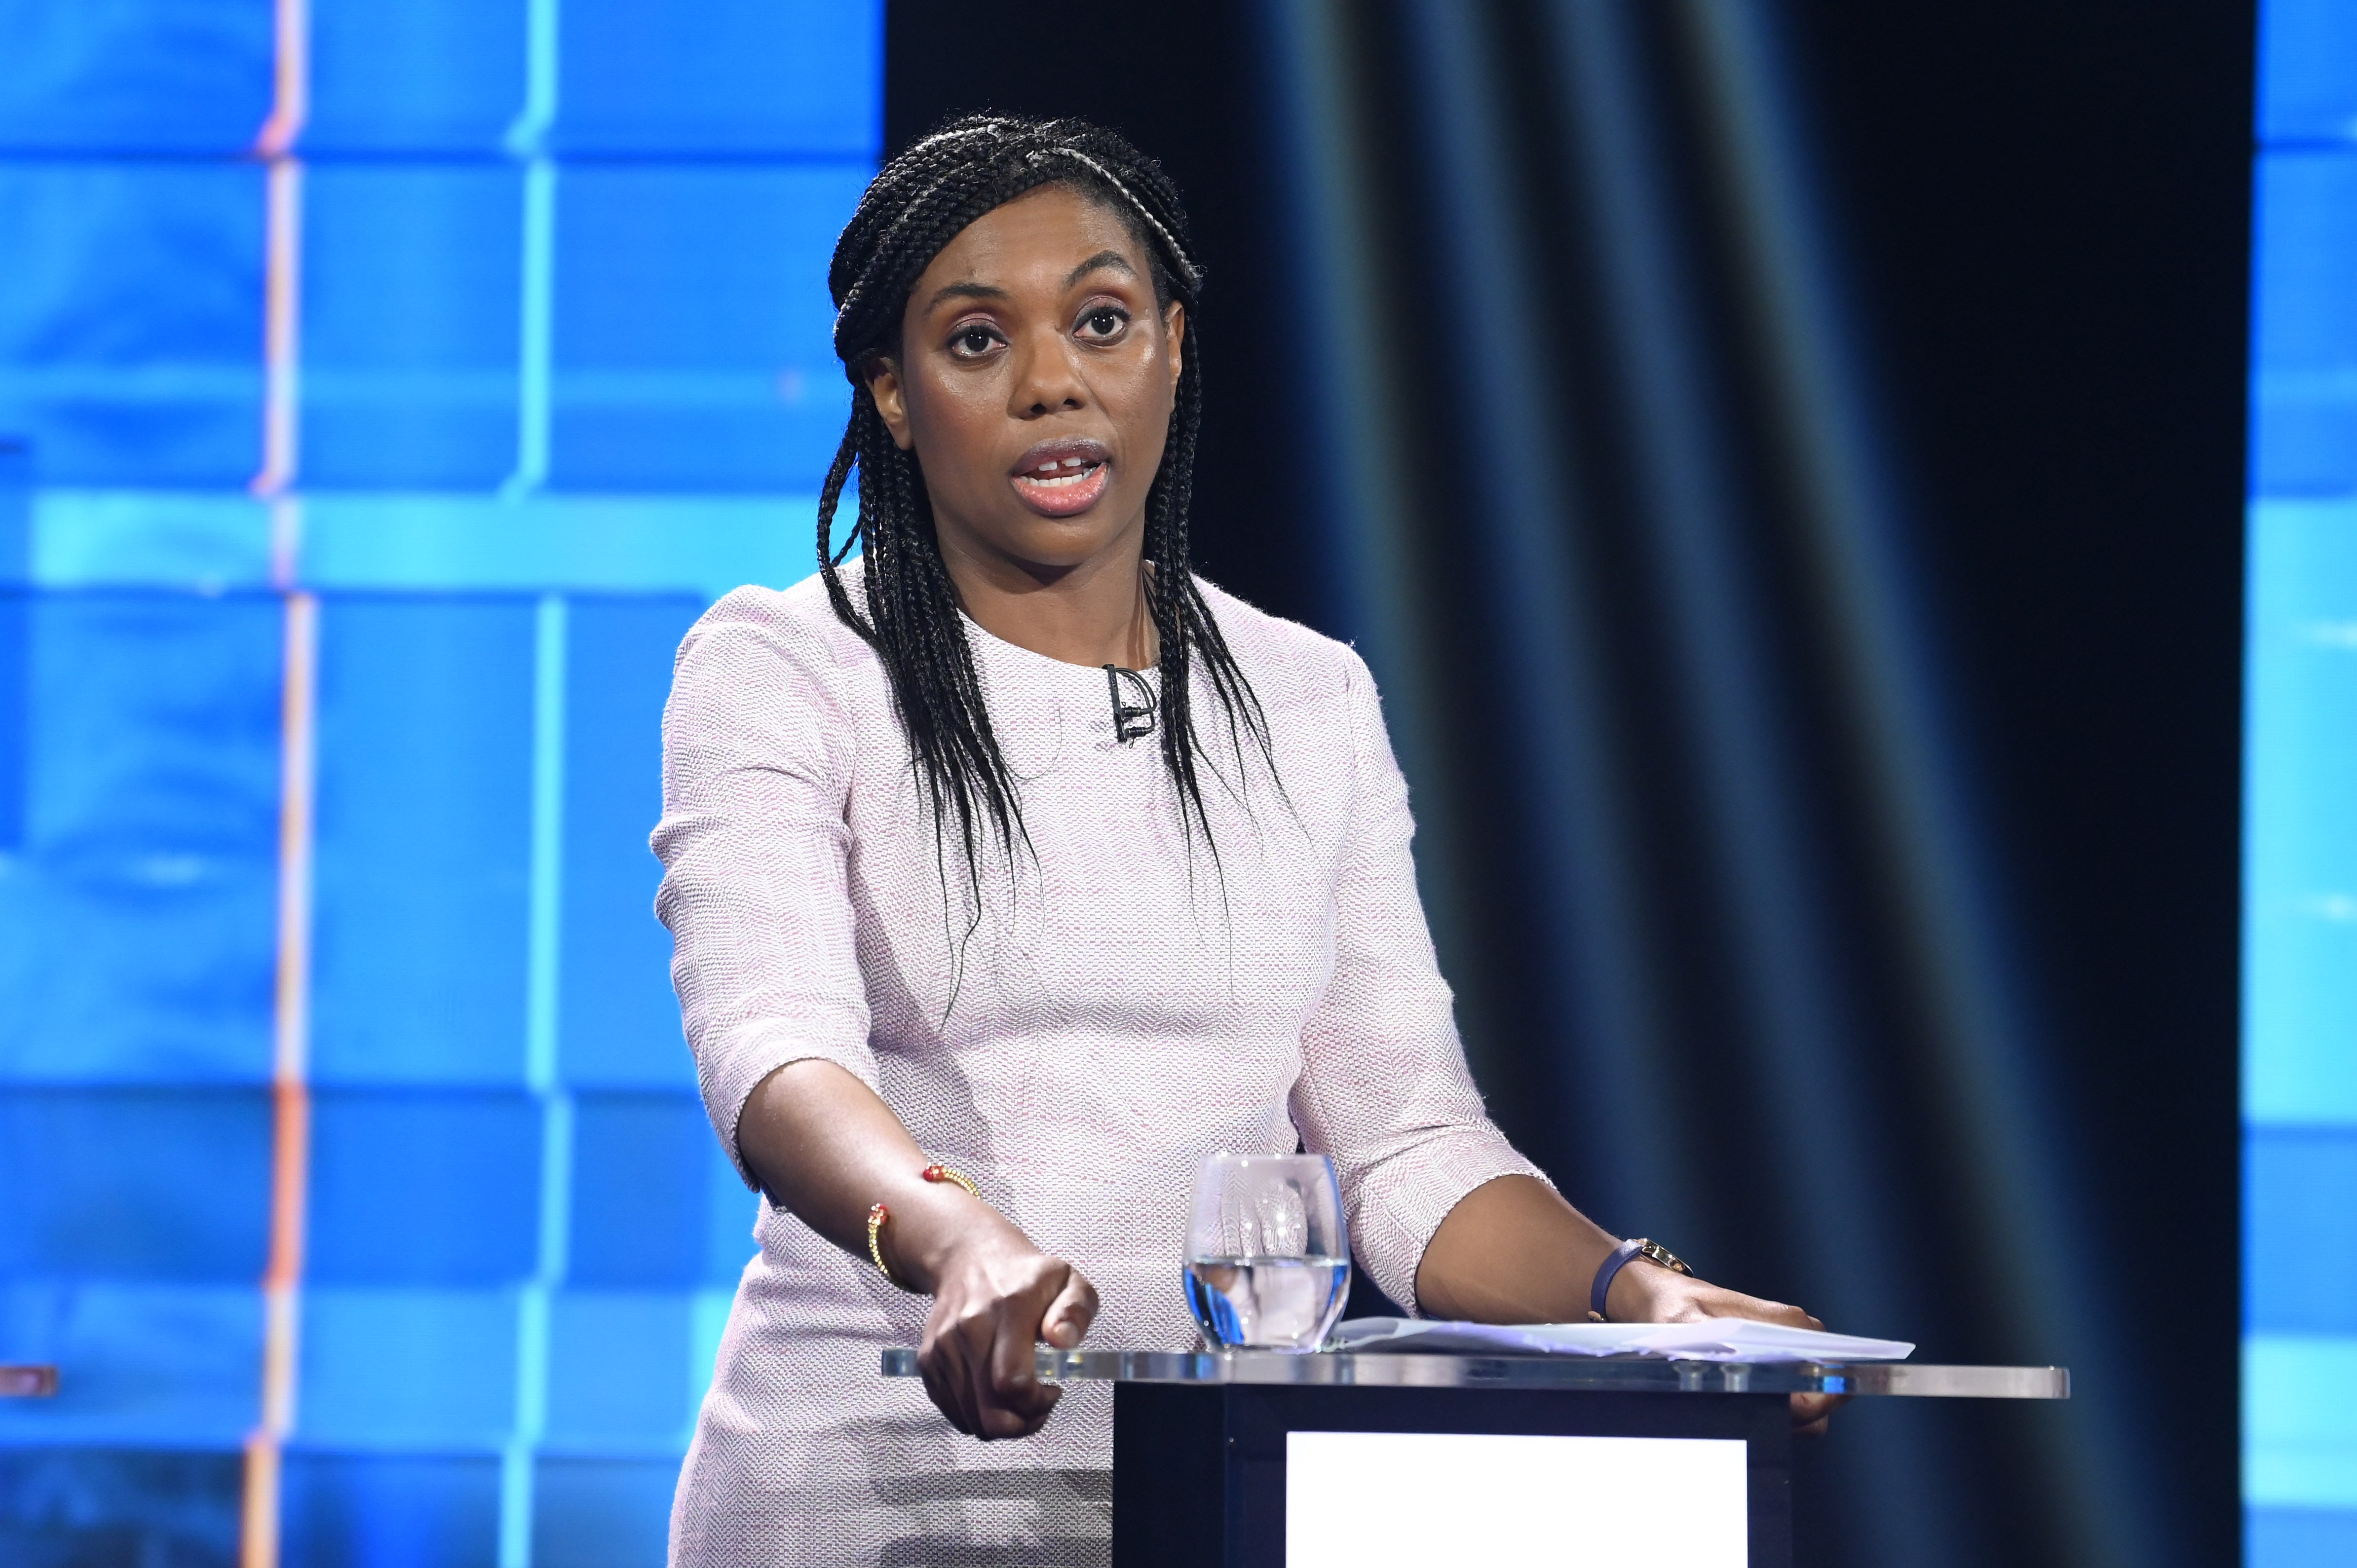 Kemi Badenoch during the second live TV debate for the Conservative leadership candidates (Jonathan Hordle/ITV)